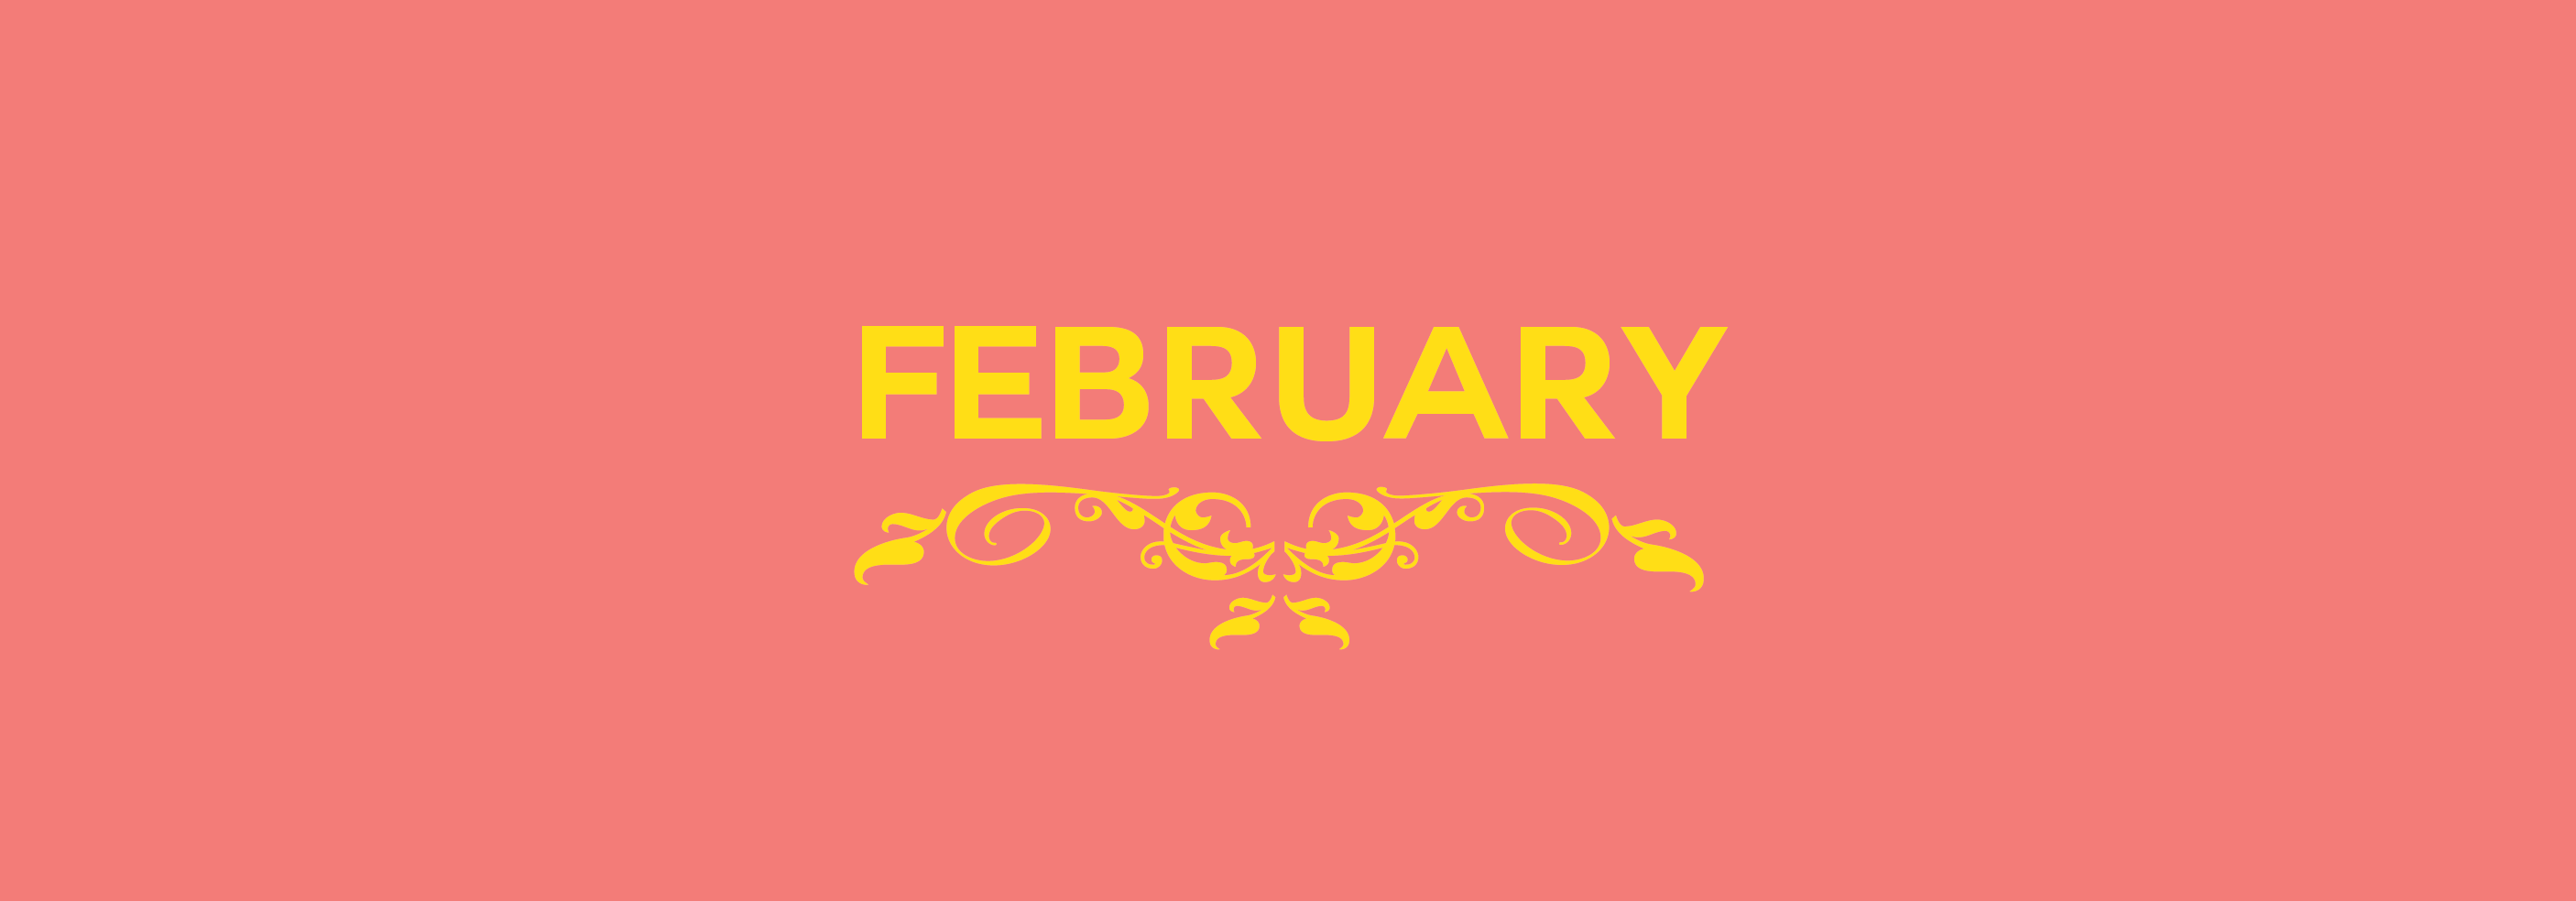 Pink banner with "February" on it in gold